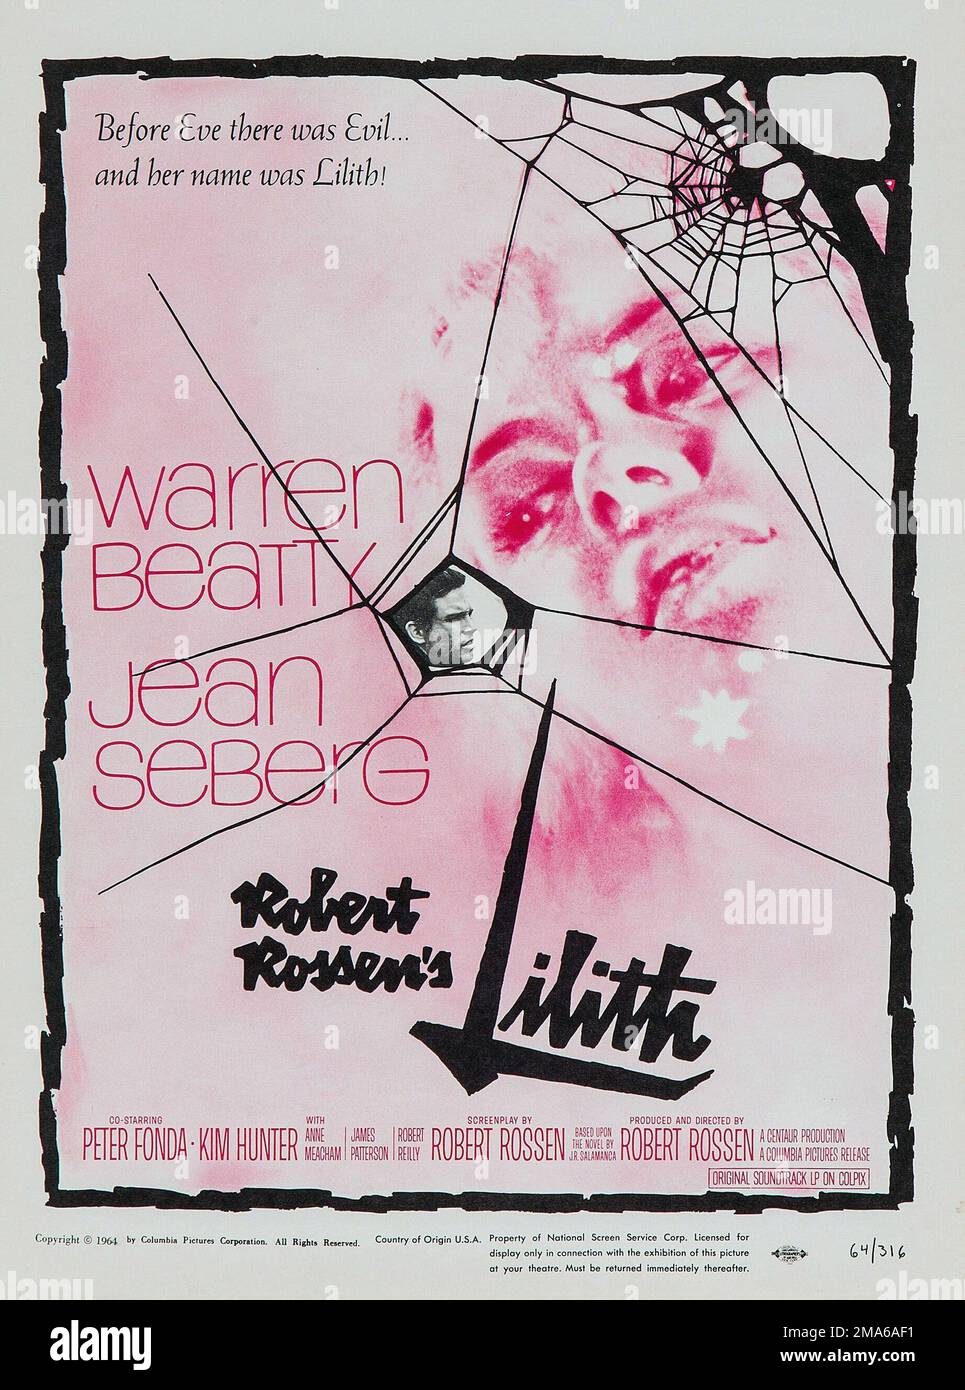 LILITH (1964), directed by ROBERT ROSSEN. Credit: COLUMBIA PICTURES / Album Stock Photo